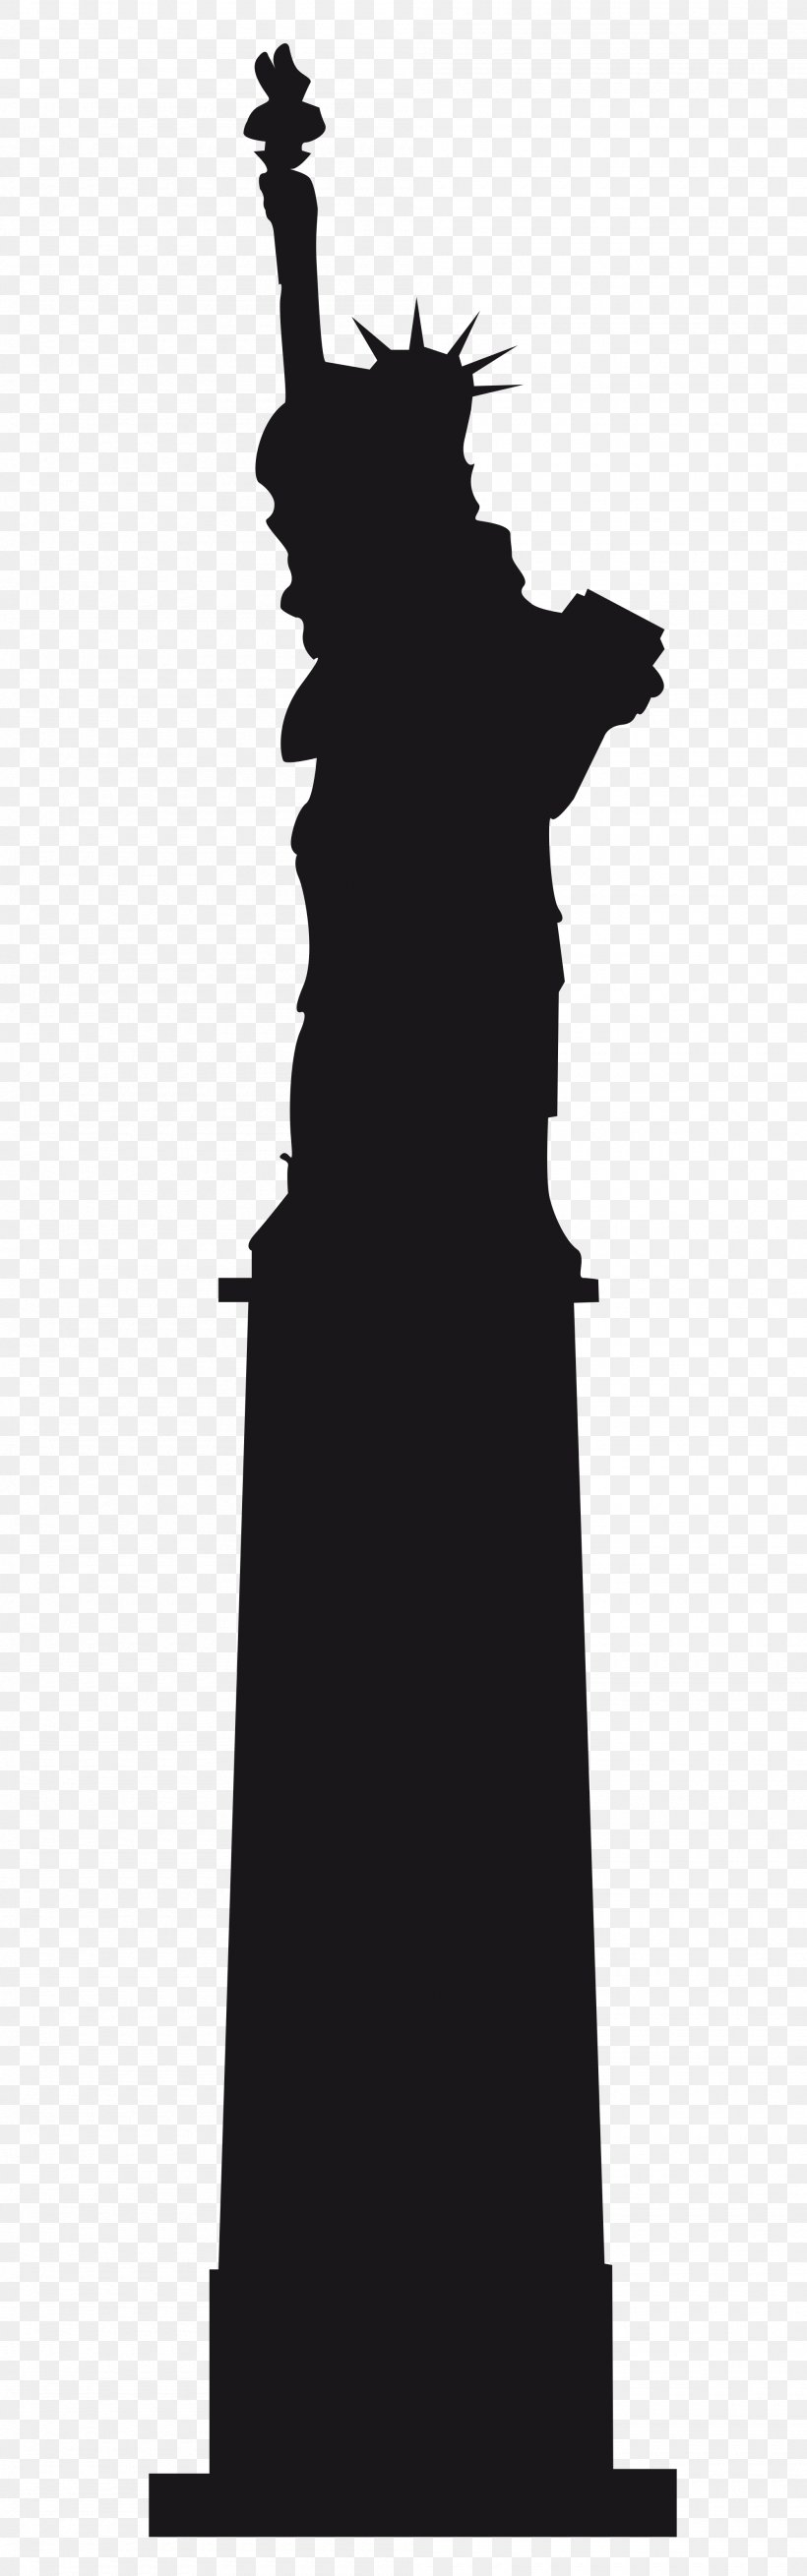 Statue Of Liberty Paris Silhouette, PNG, 2000x6388px, Statue Of Liberty, Black, Black And White, English, Liberty Island Download Free